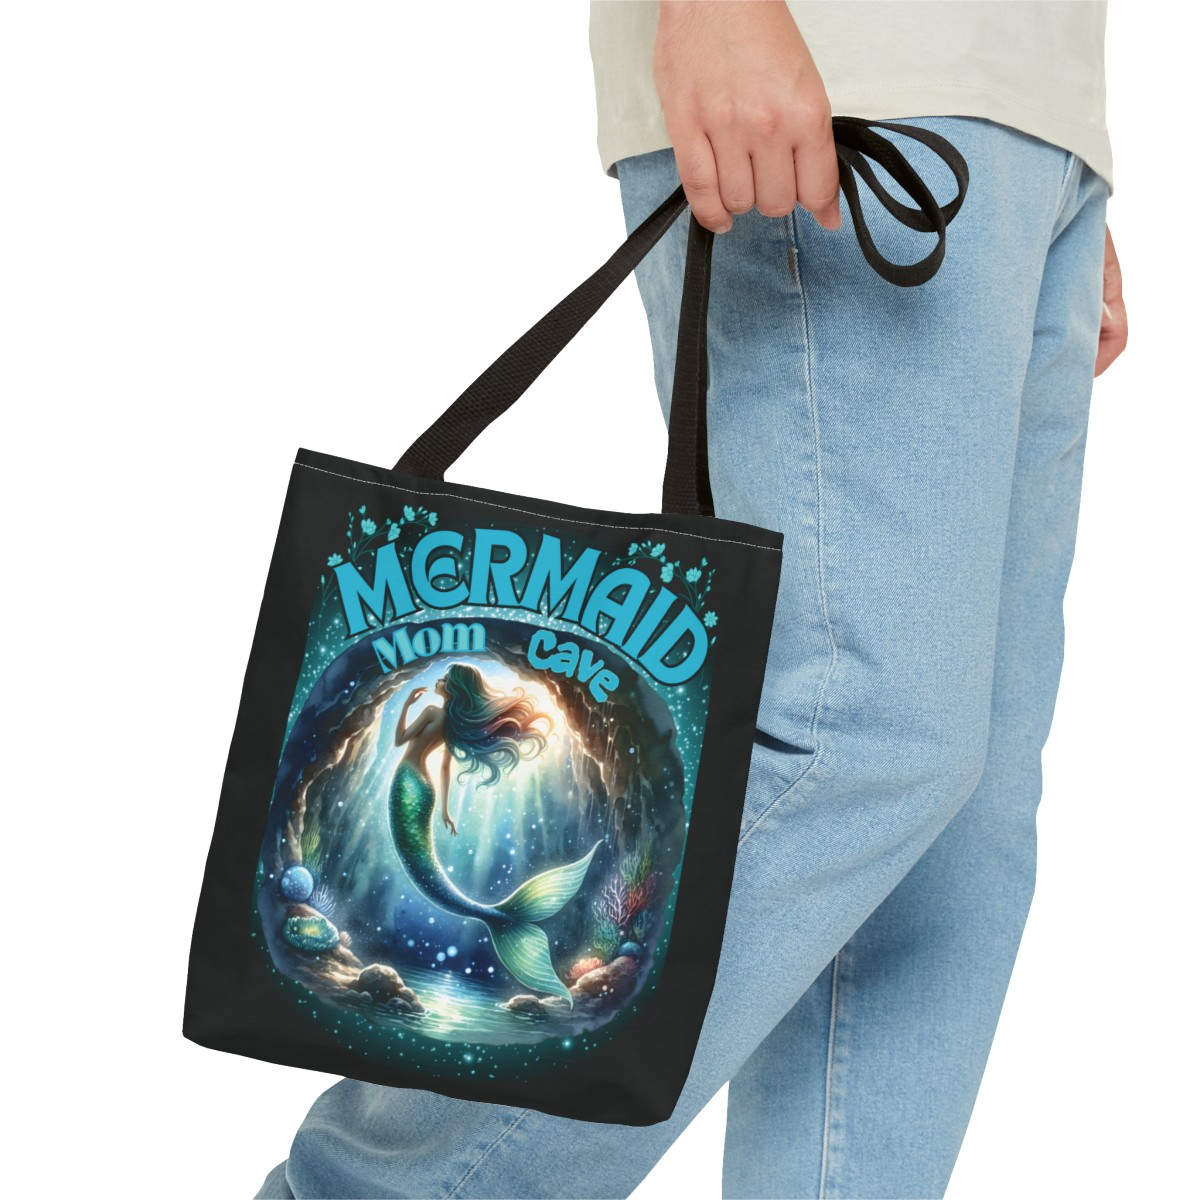 A gorgeous mermaid swims in her mermaid mom cave with her sea shells and plants around her - Mermaid Mom Cave is the text above her cave with blue flowers above the text - black bag - inside too- handles